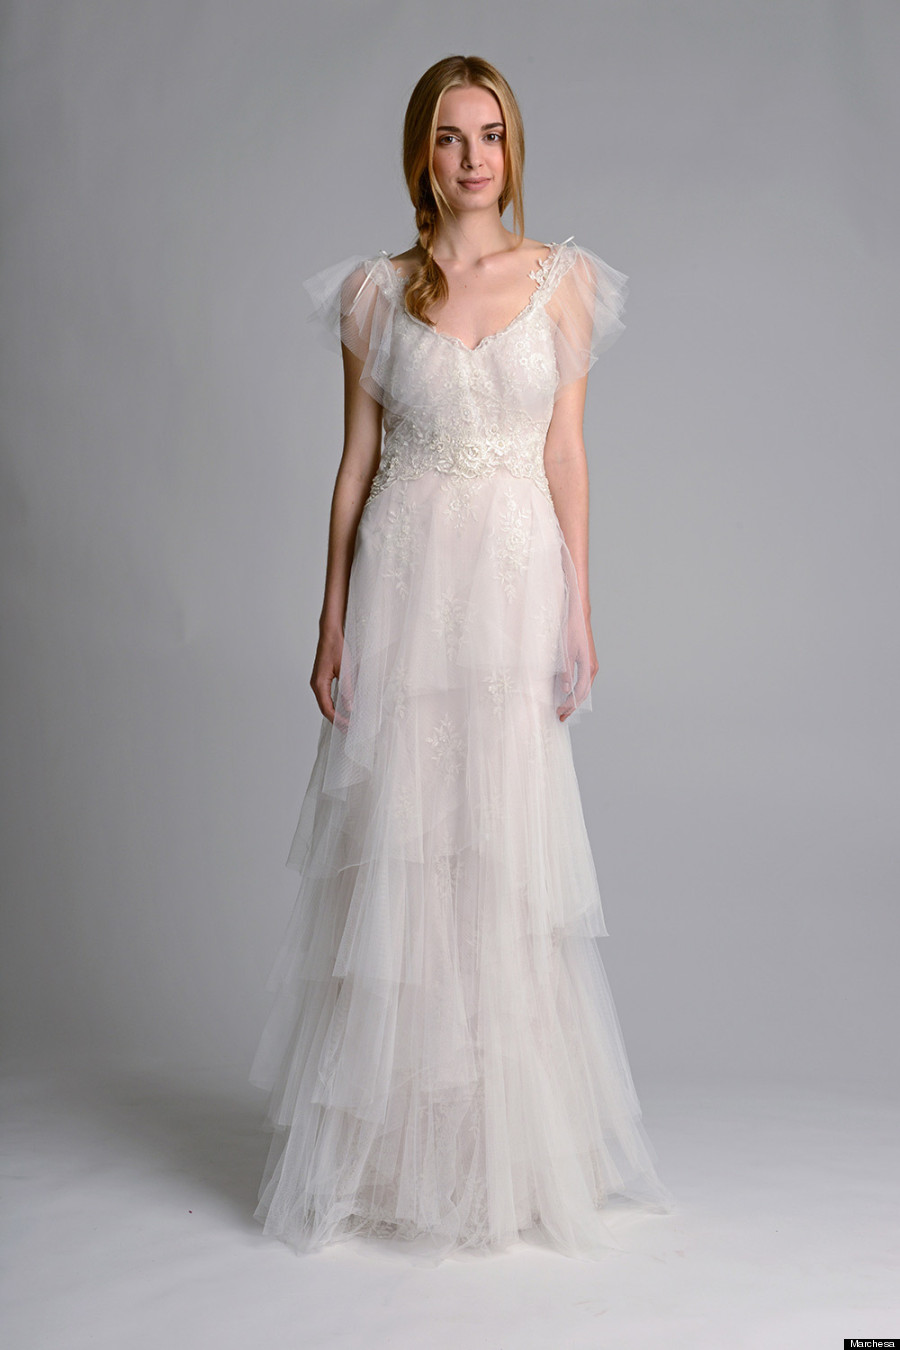 Fall Wedding Dress Trends: Beautiful Gowns For Your 2014 Nuptials (PHOTOS)